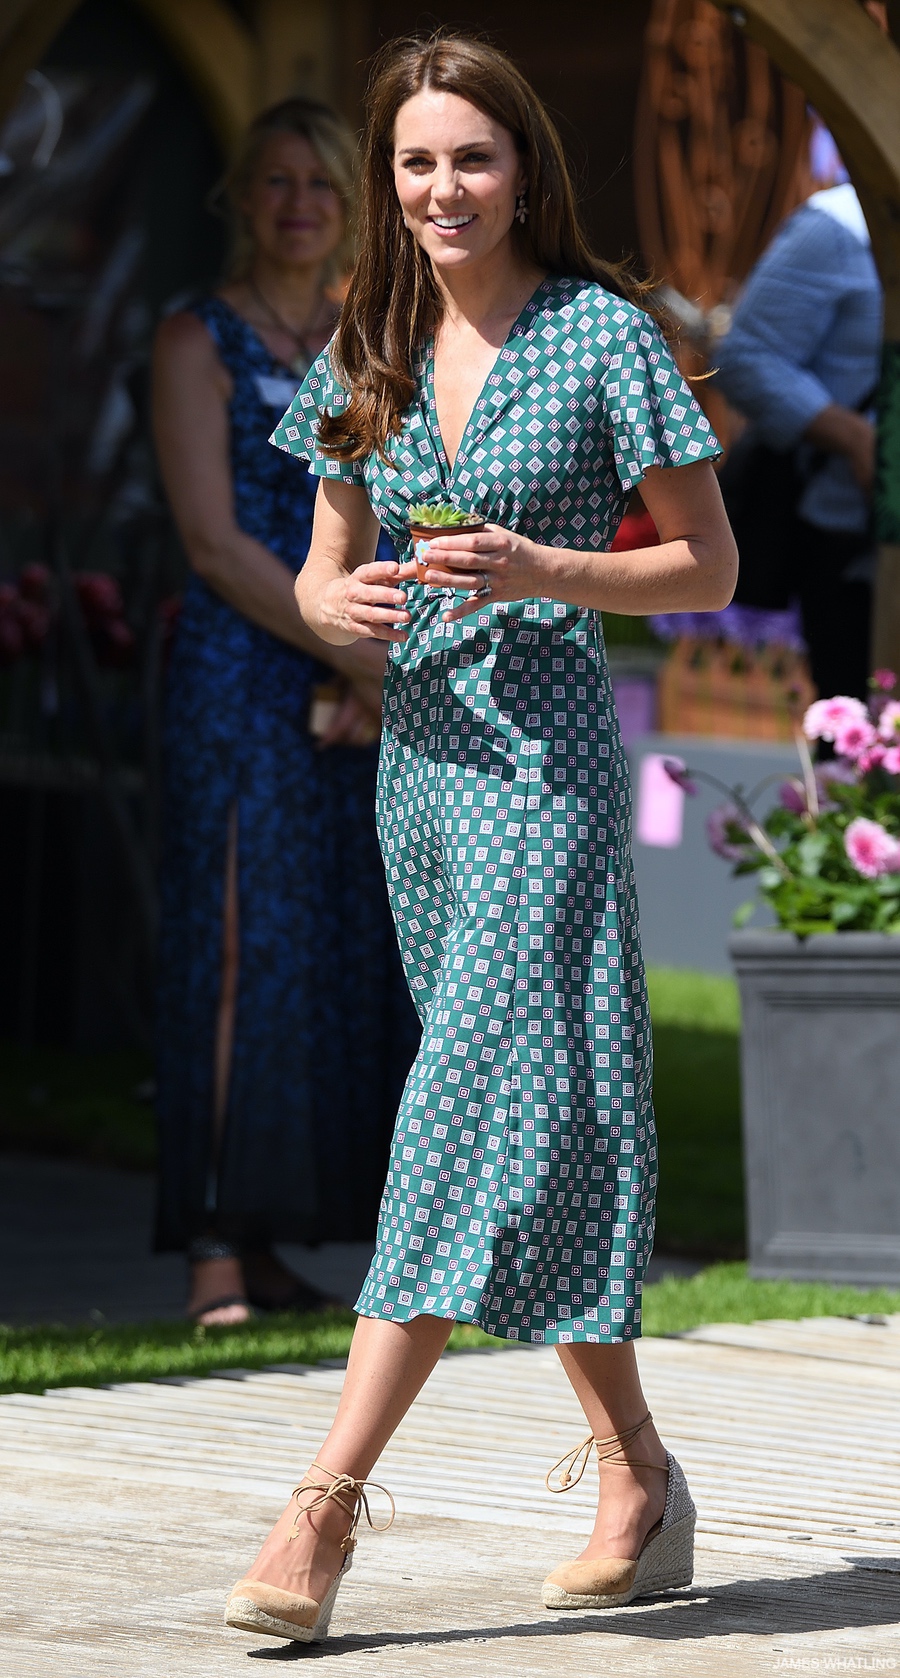 Kate Middleton wears the Casteñer wedges during an engagement over the summer